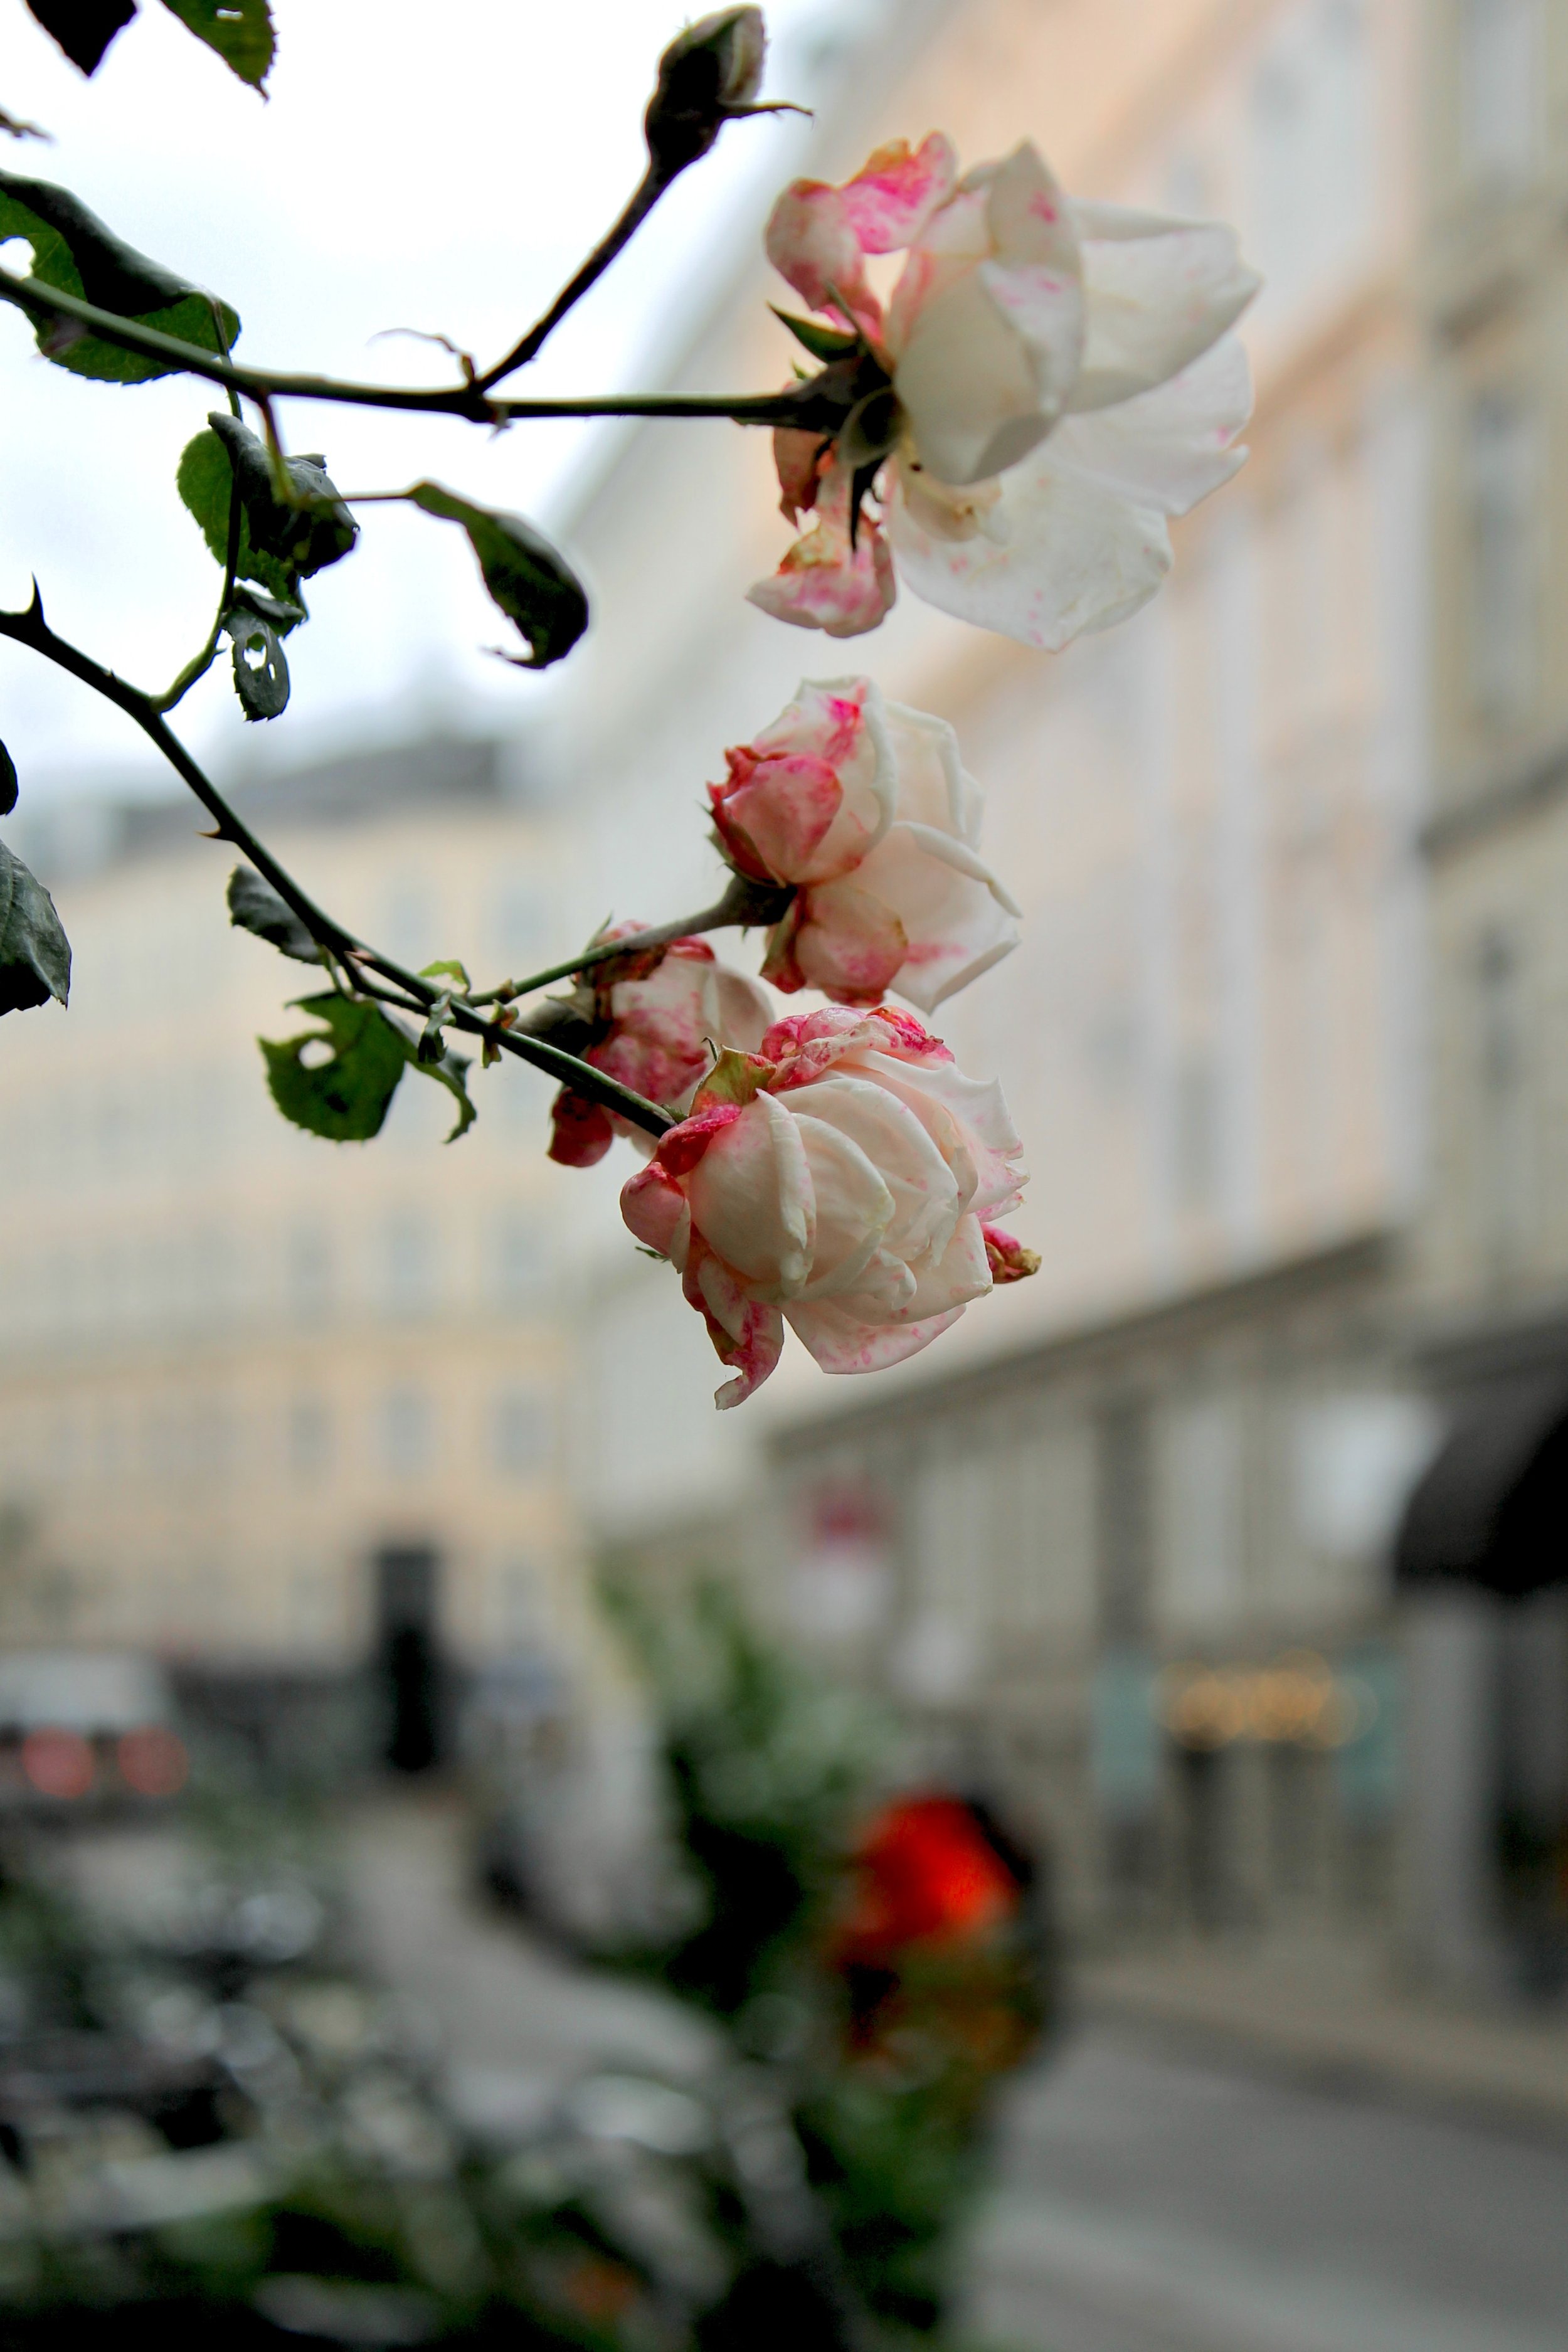 Roses growing on the streets of Copenhagen